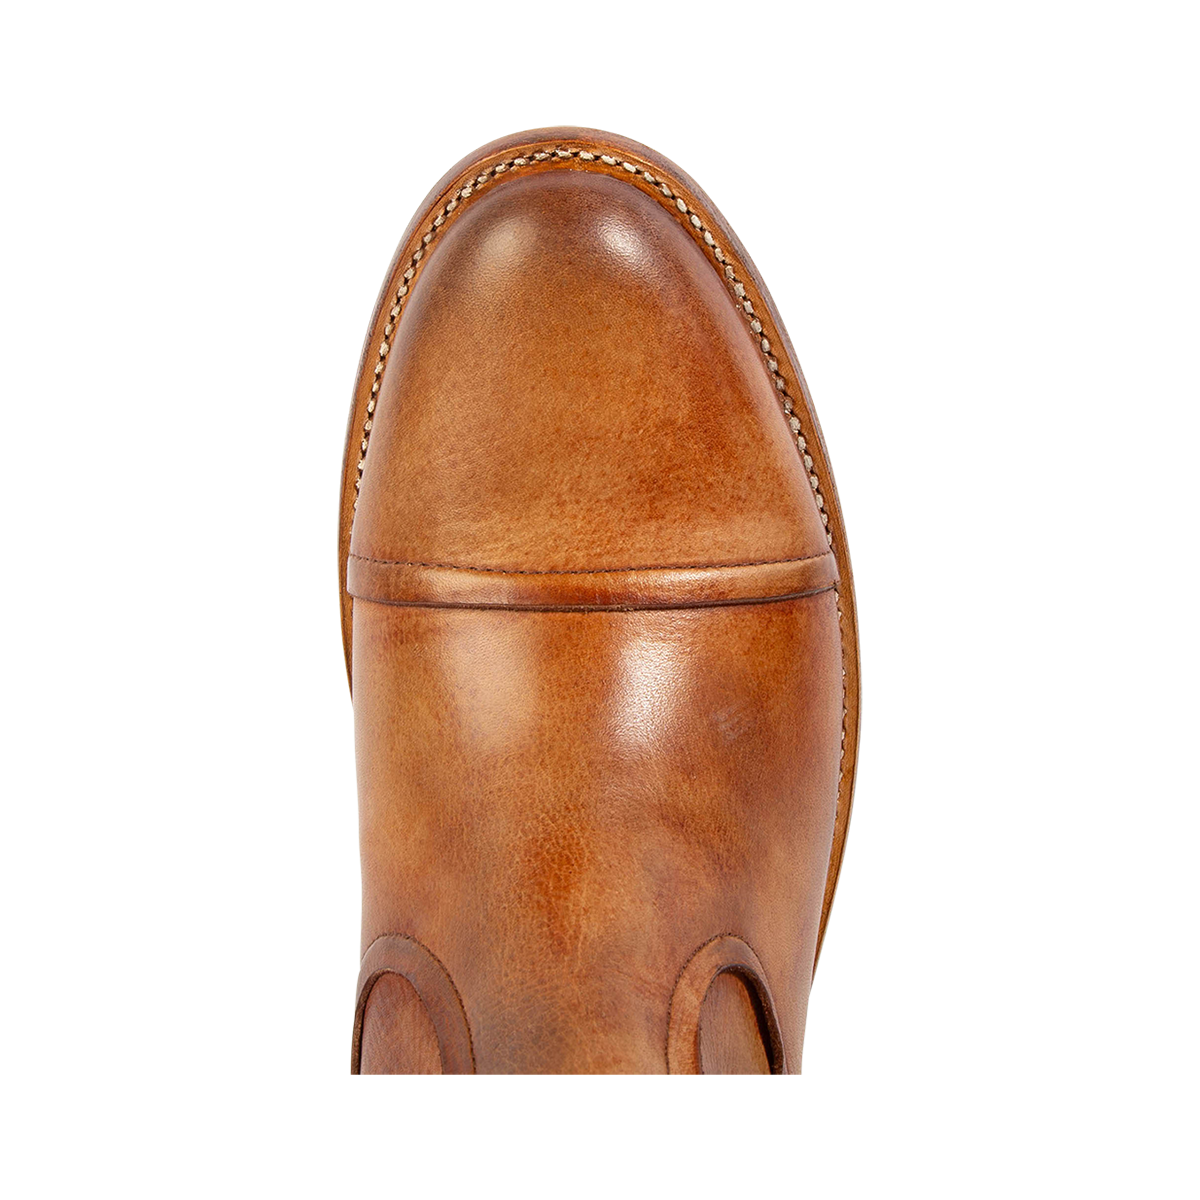 Top view showing an almond toe on FREEBIRD men's Brooks cognac leather boot